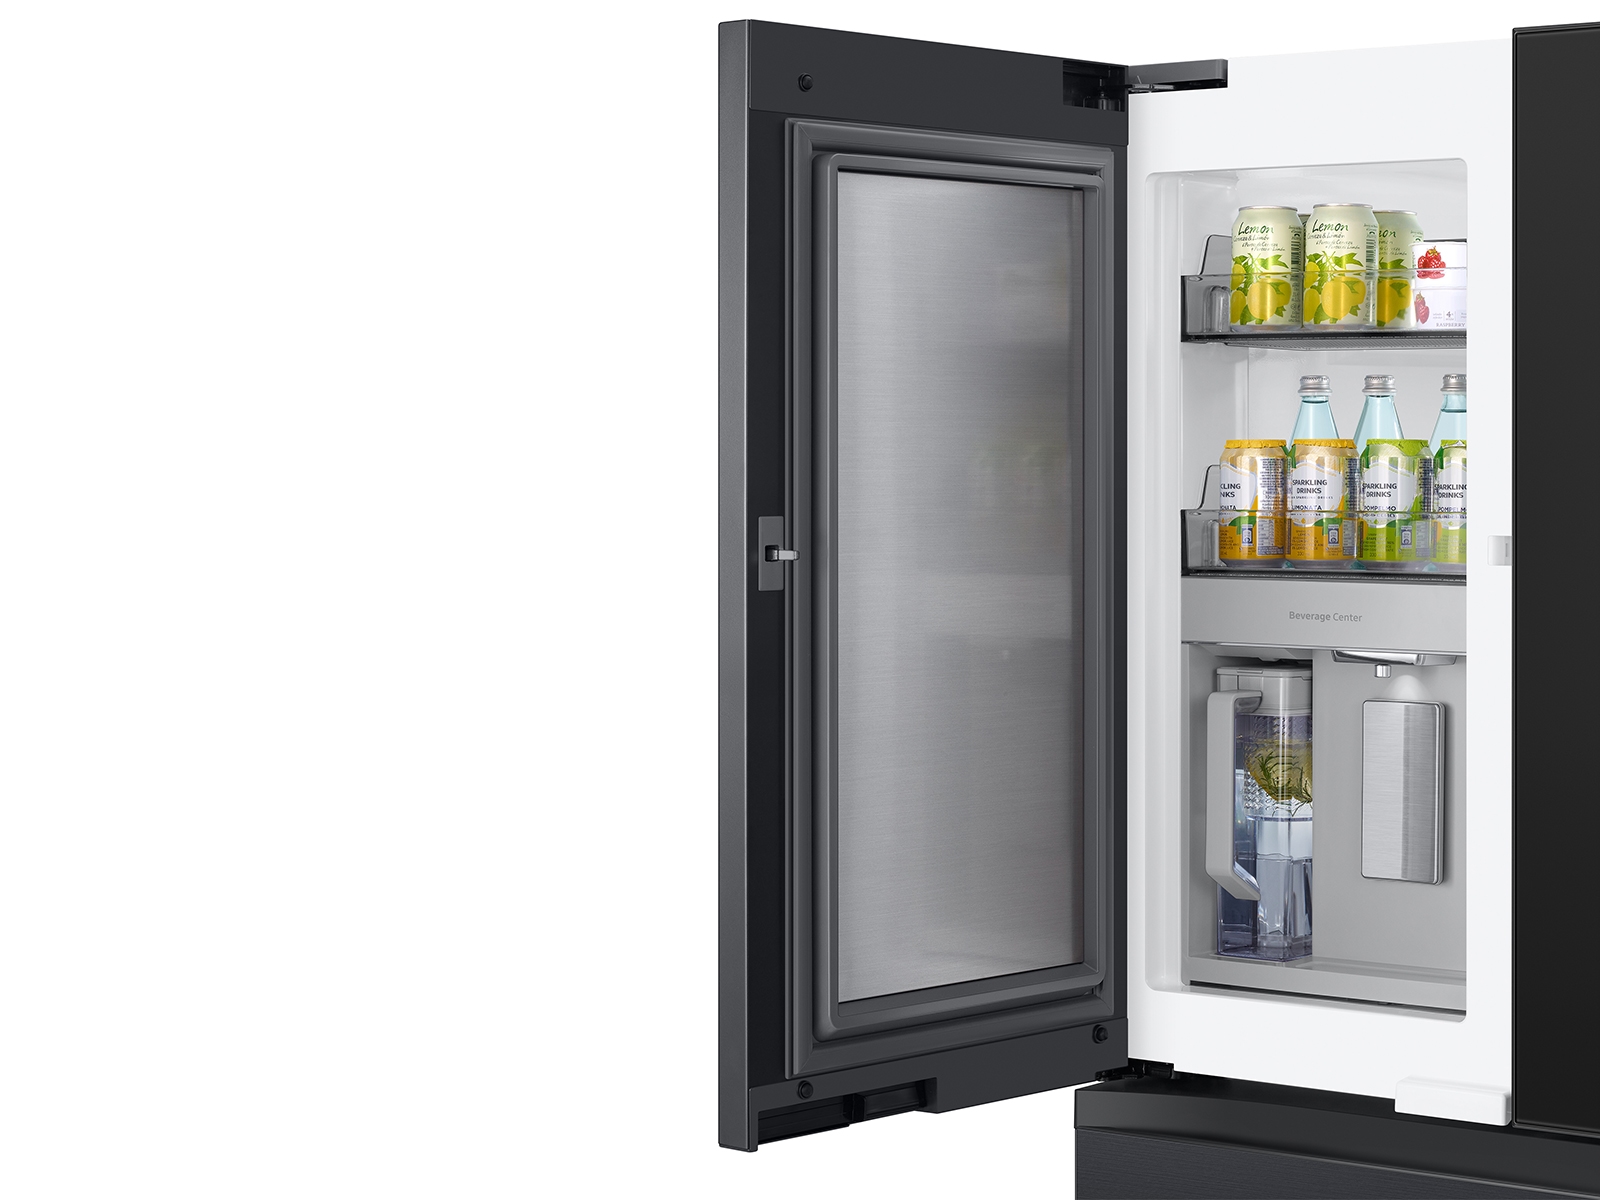 GE Introduces Fridges With Autofill Water Pitchers - Reviewed